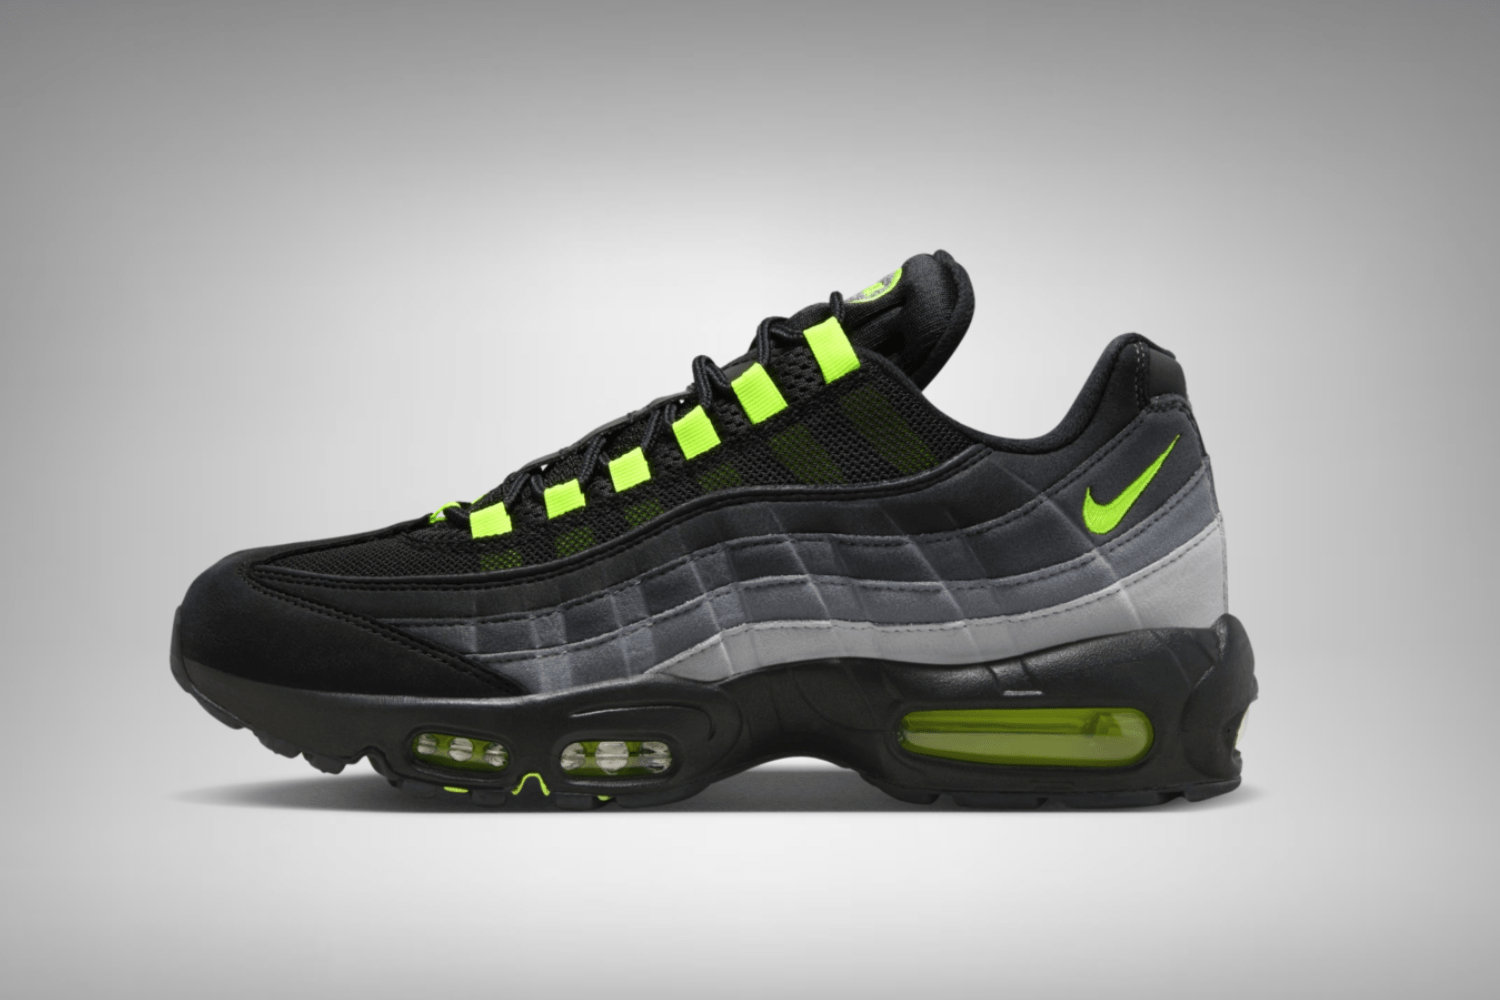 The Nike Air Max 95 SE 'Reverse Neon' is now available at JD Sports